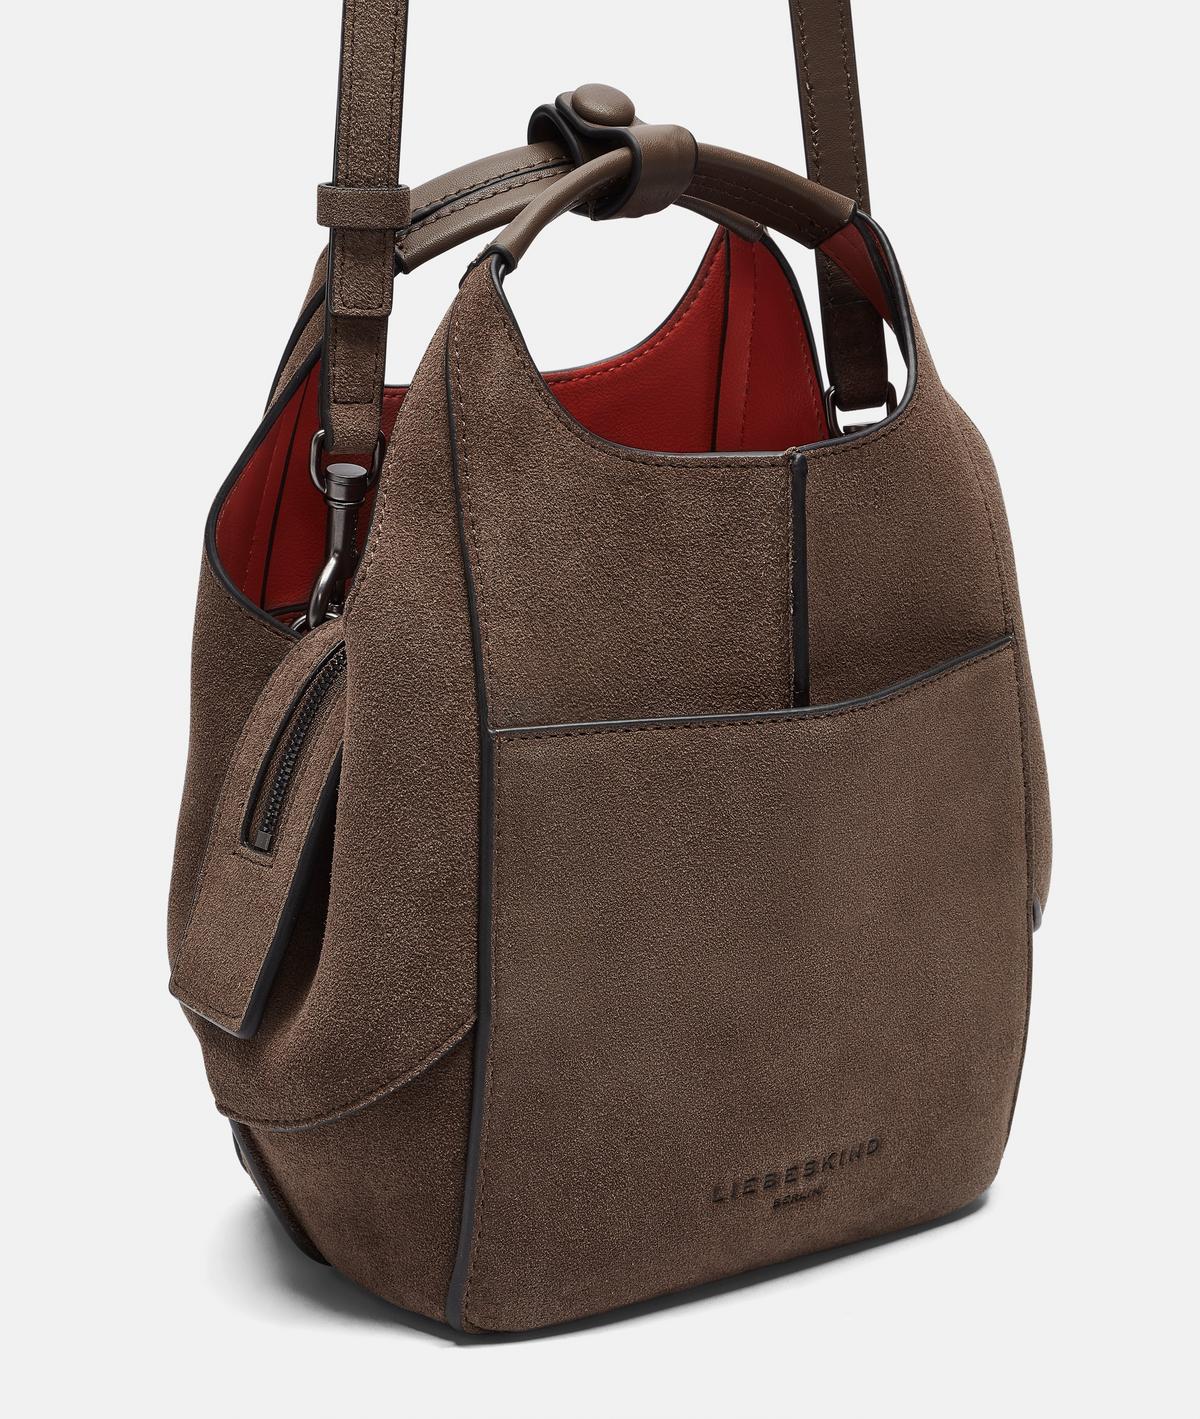 LIEBESKIND BERLIN Lilly Tote S